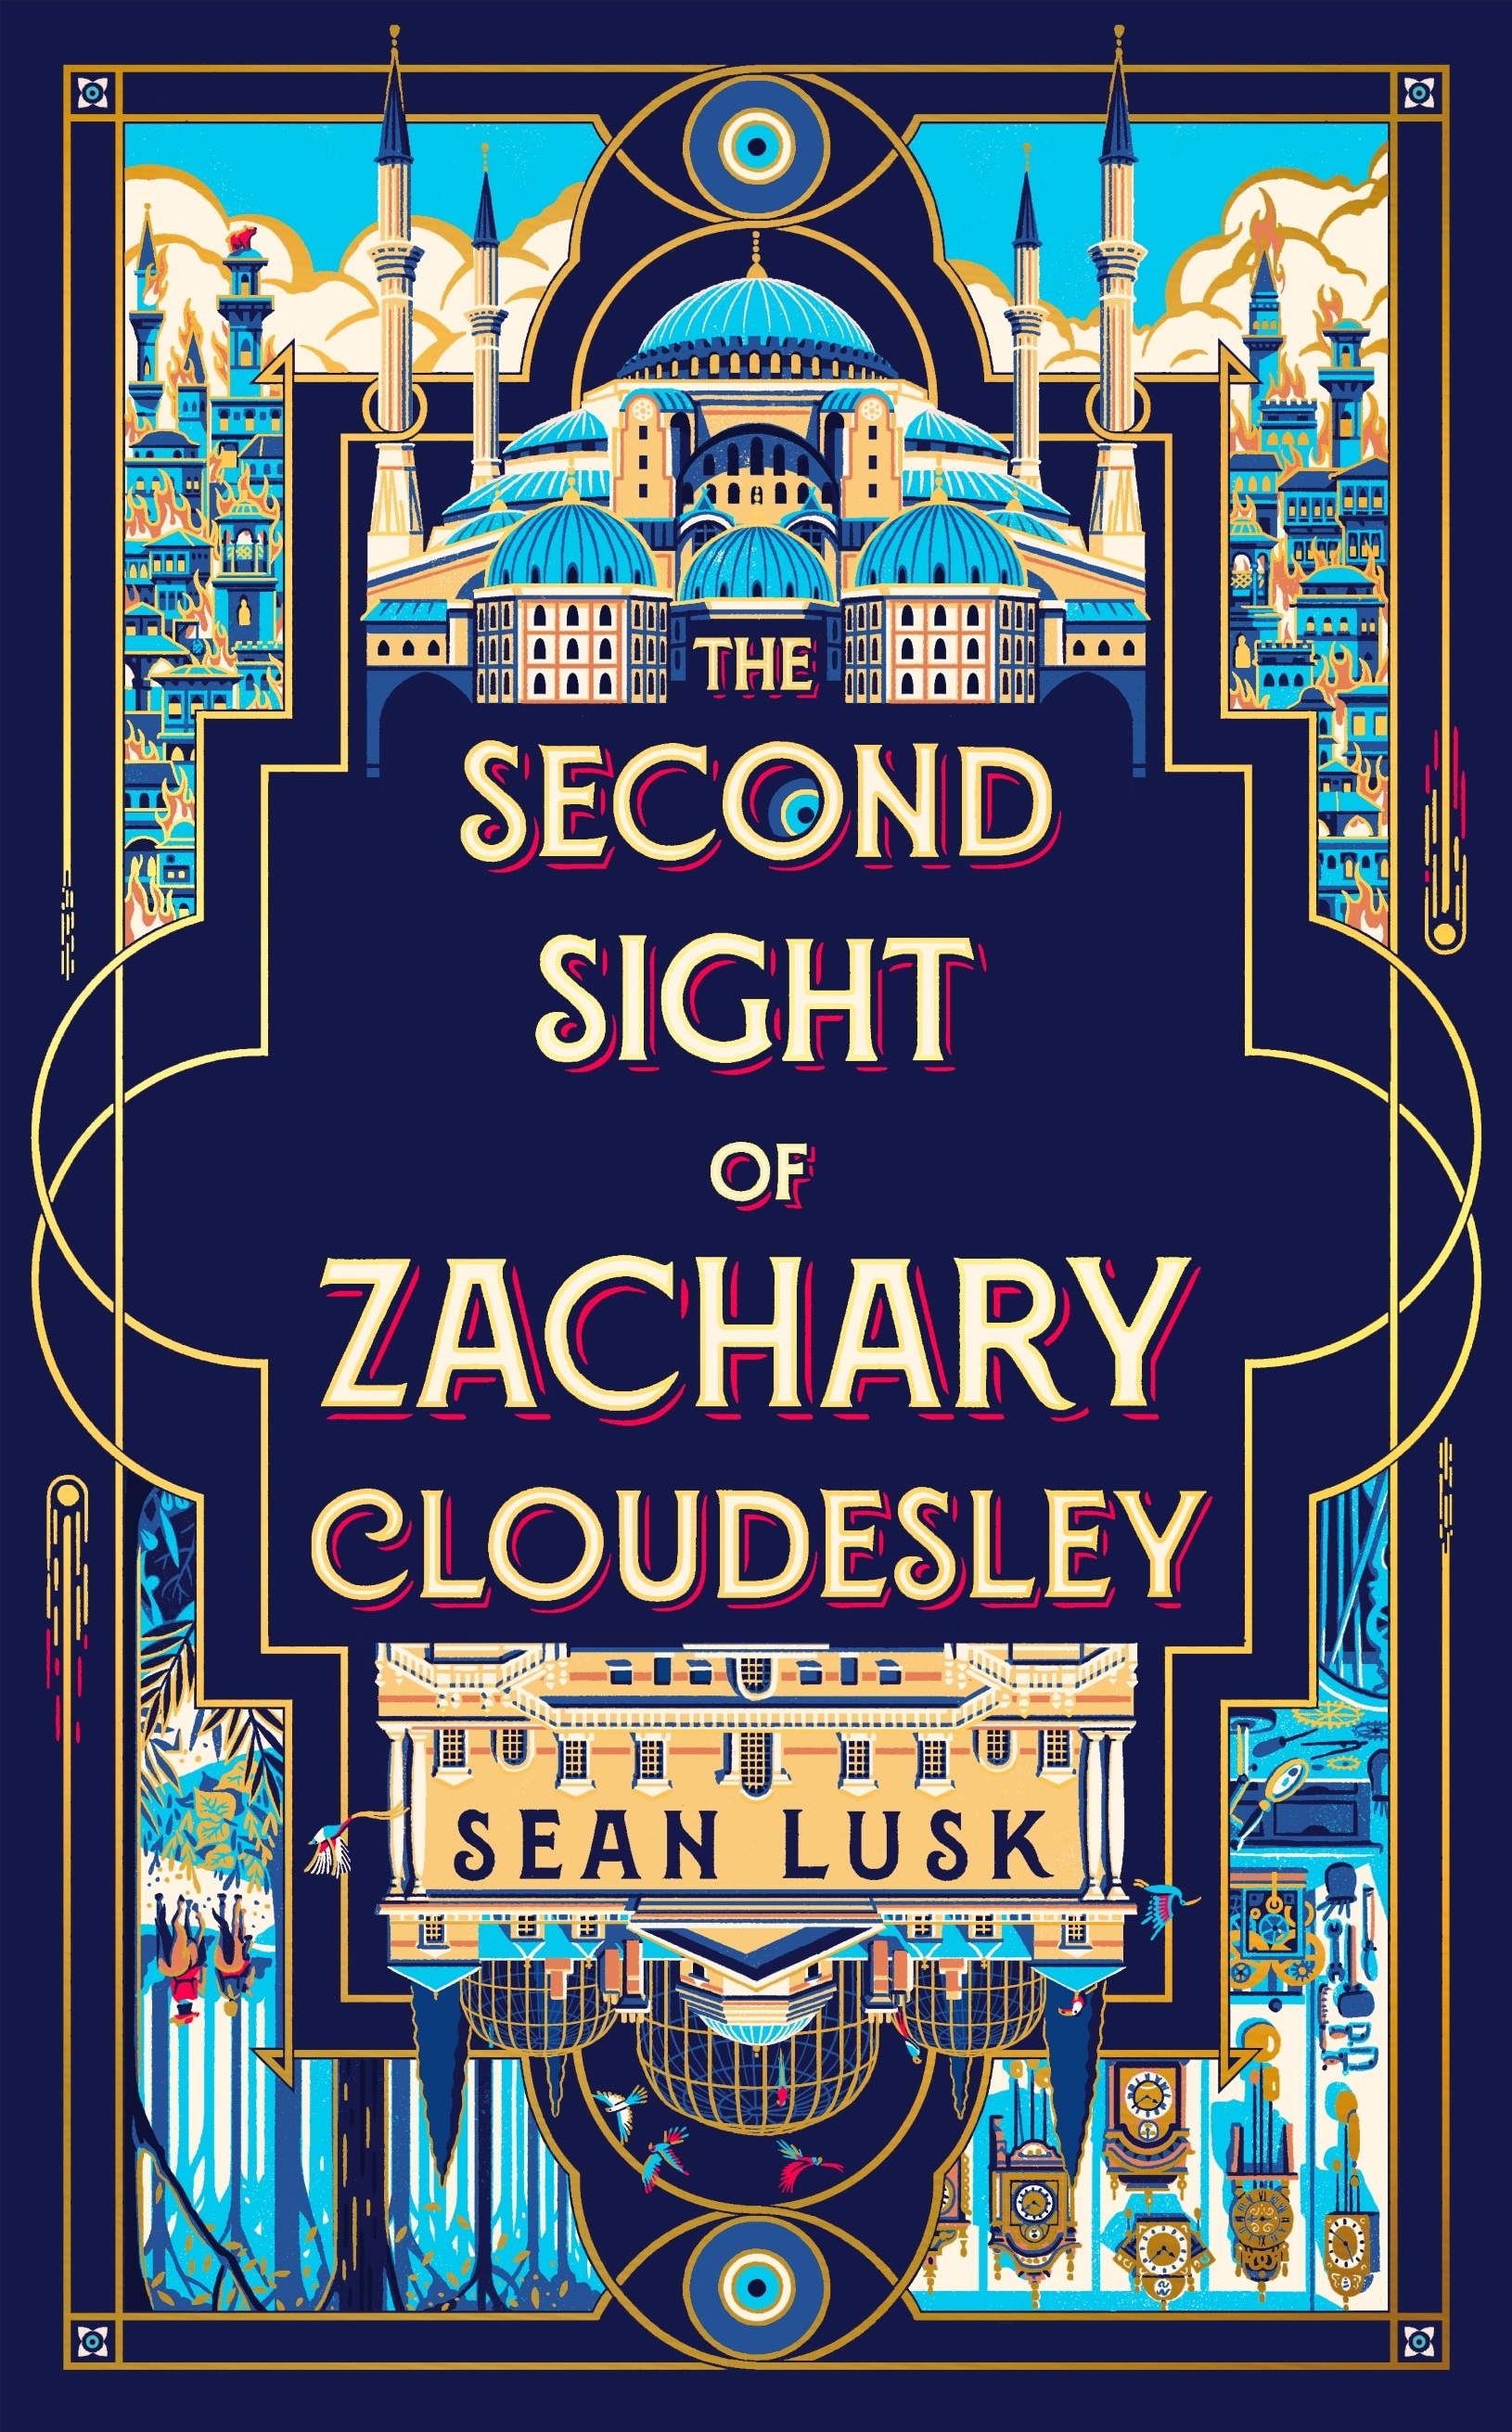 Book “The Second Sight of Zachary Cloudesley” by Sean Lusk — June 2, 2022